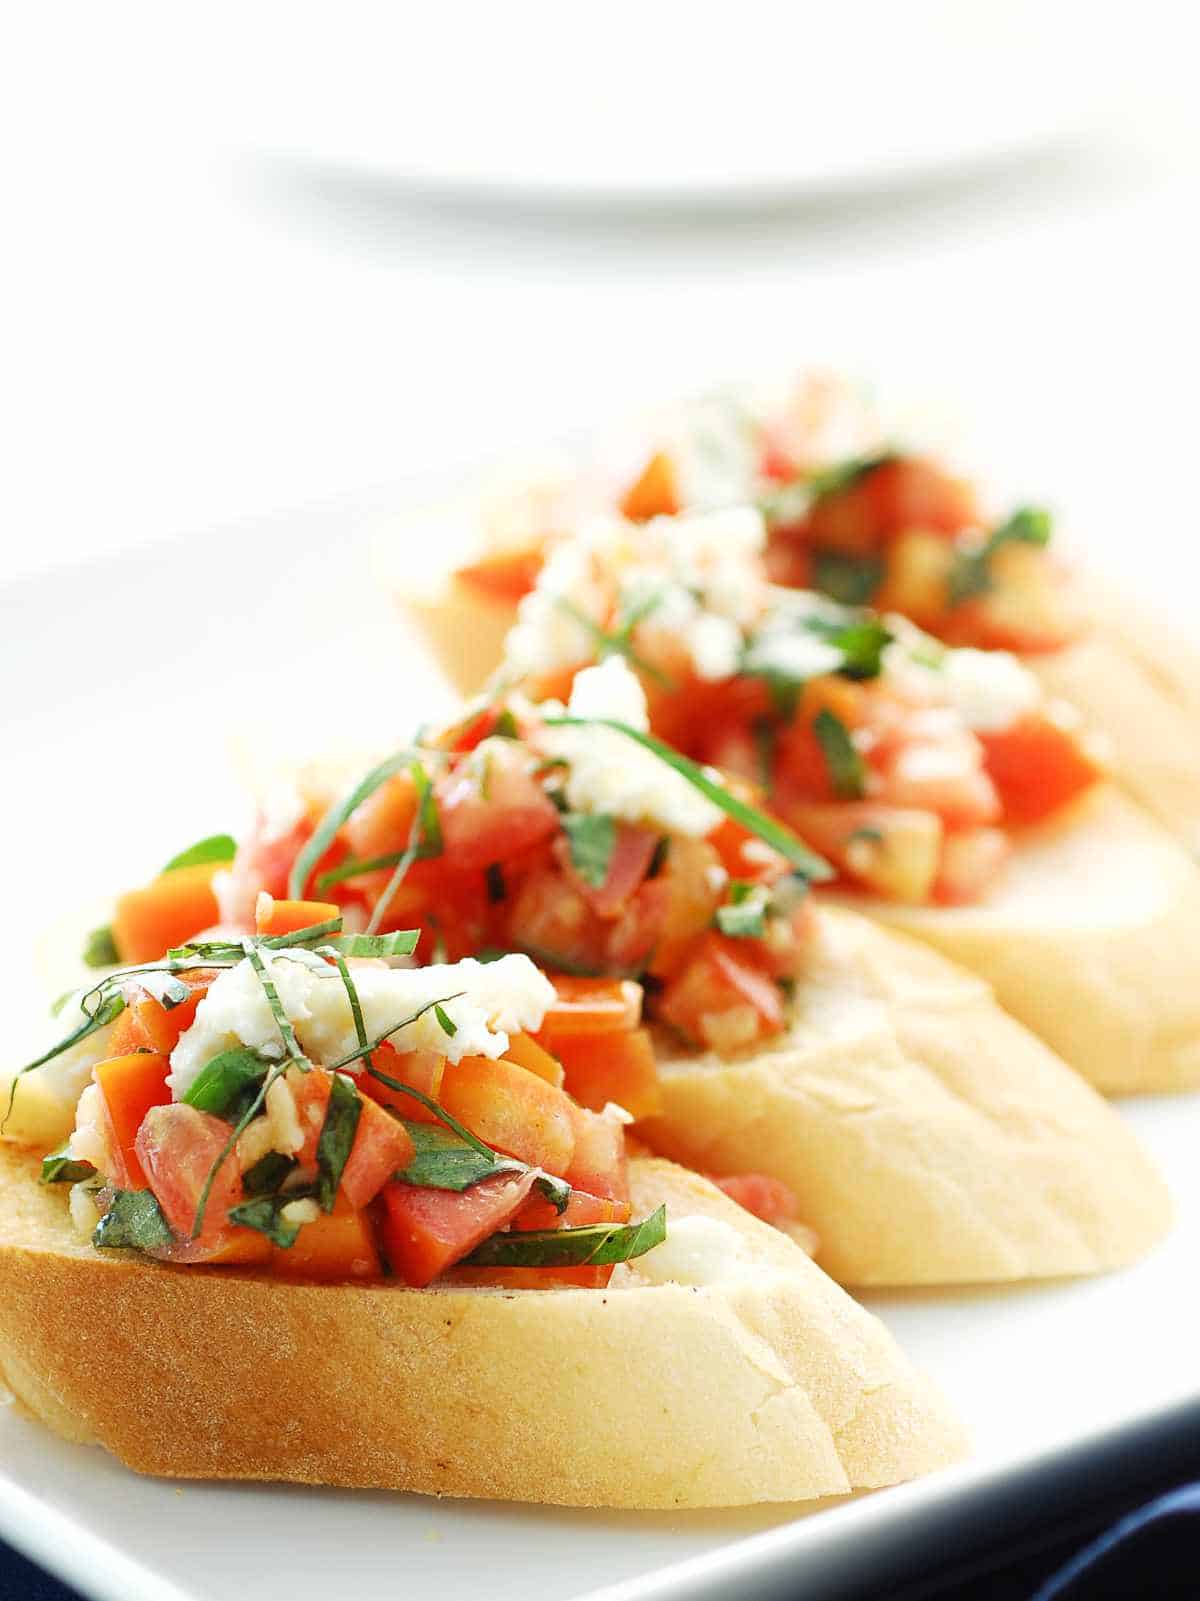 serving plate with four slices of french bread with a cherry tomato bruschetta.